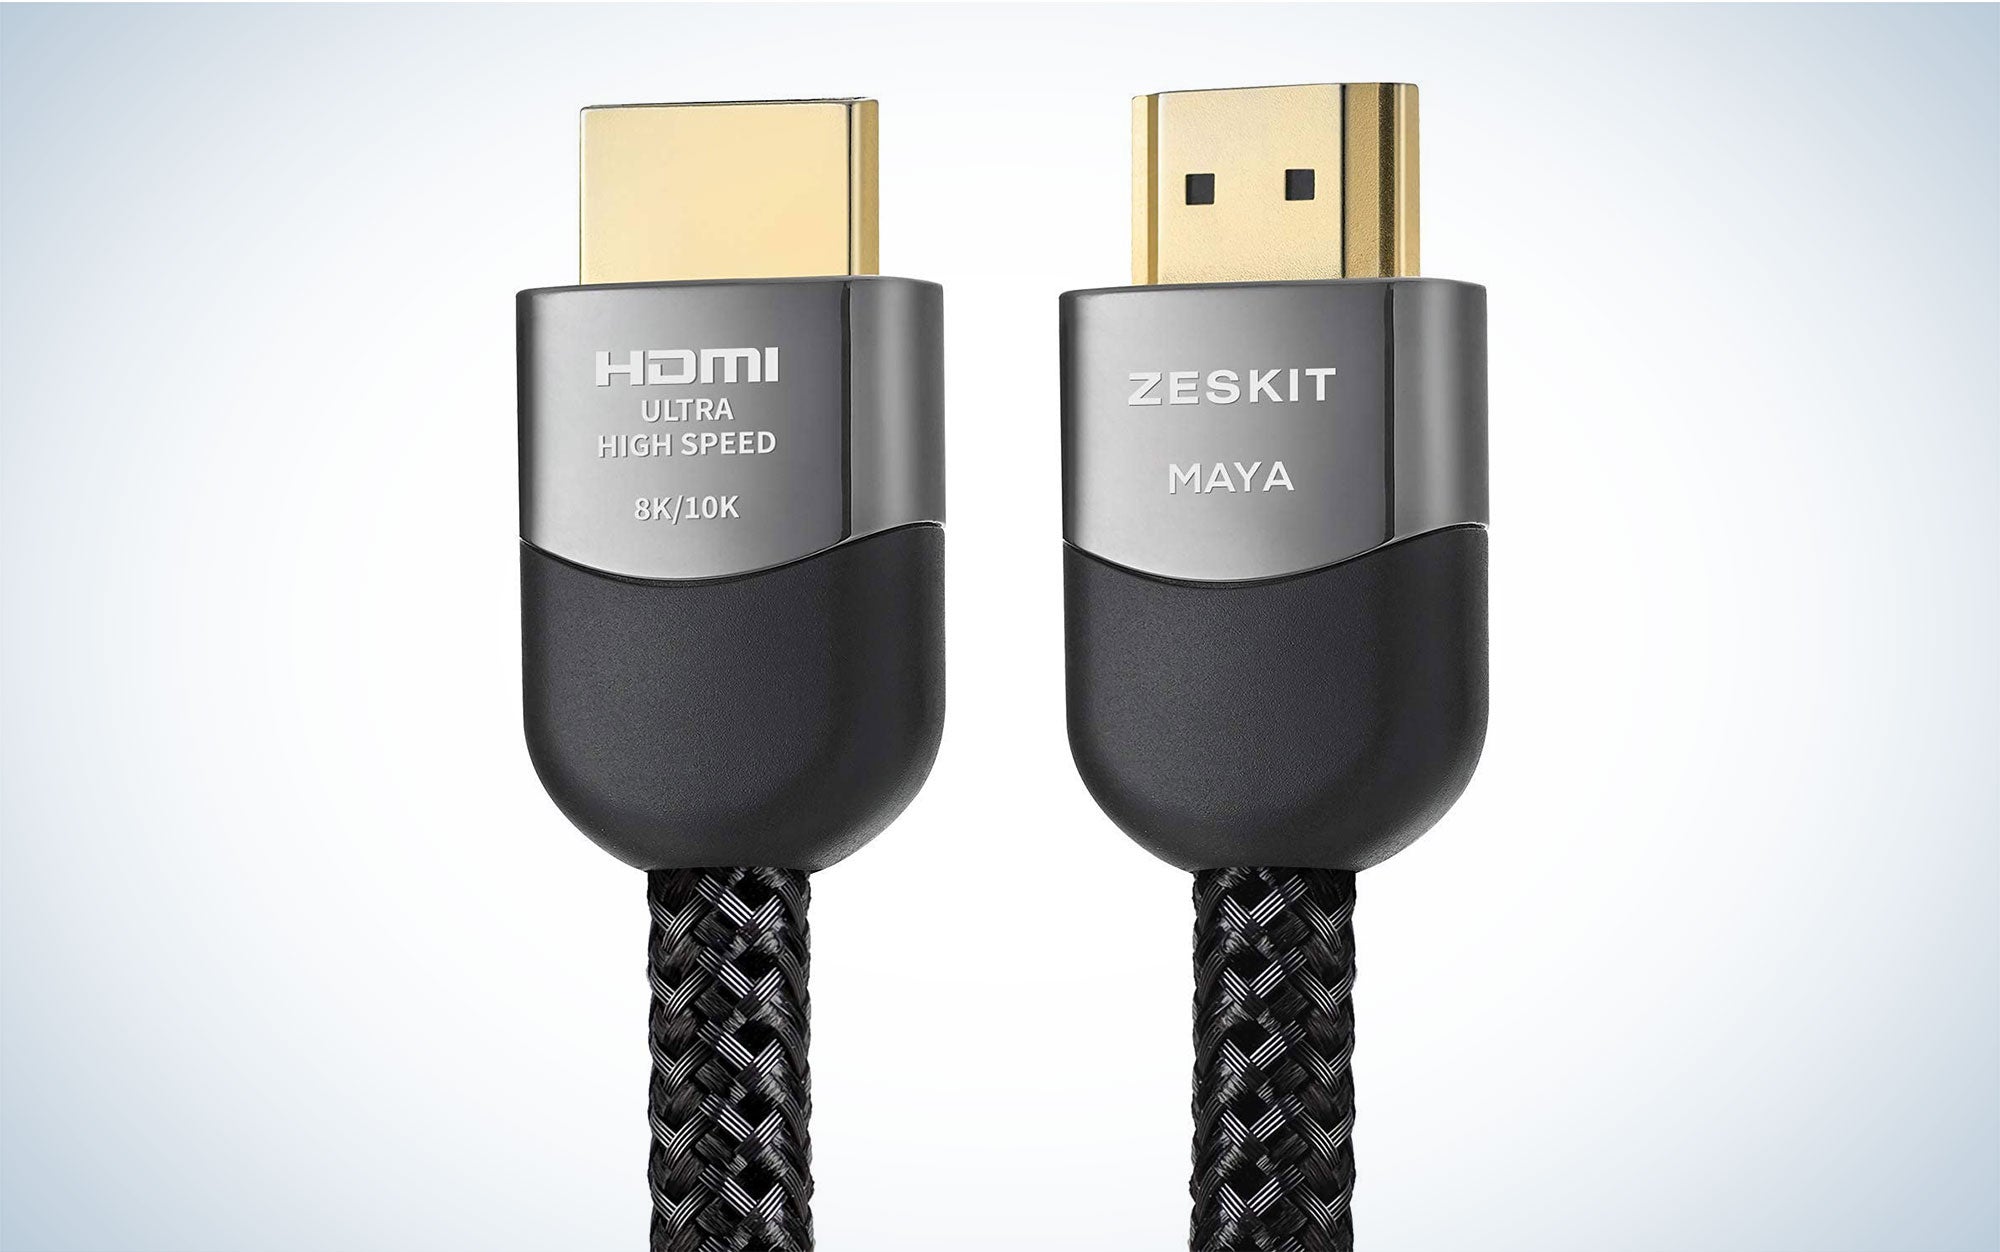 Zeskit Maya makes an 8K HDMI 2.1 cable with grey connectors and a black braided cable.